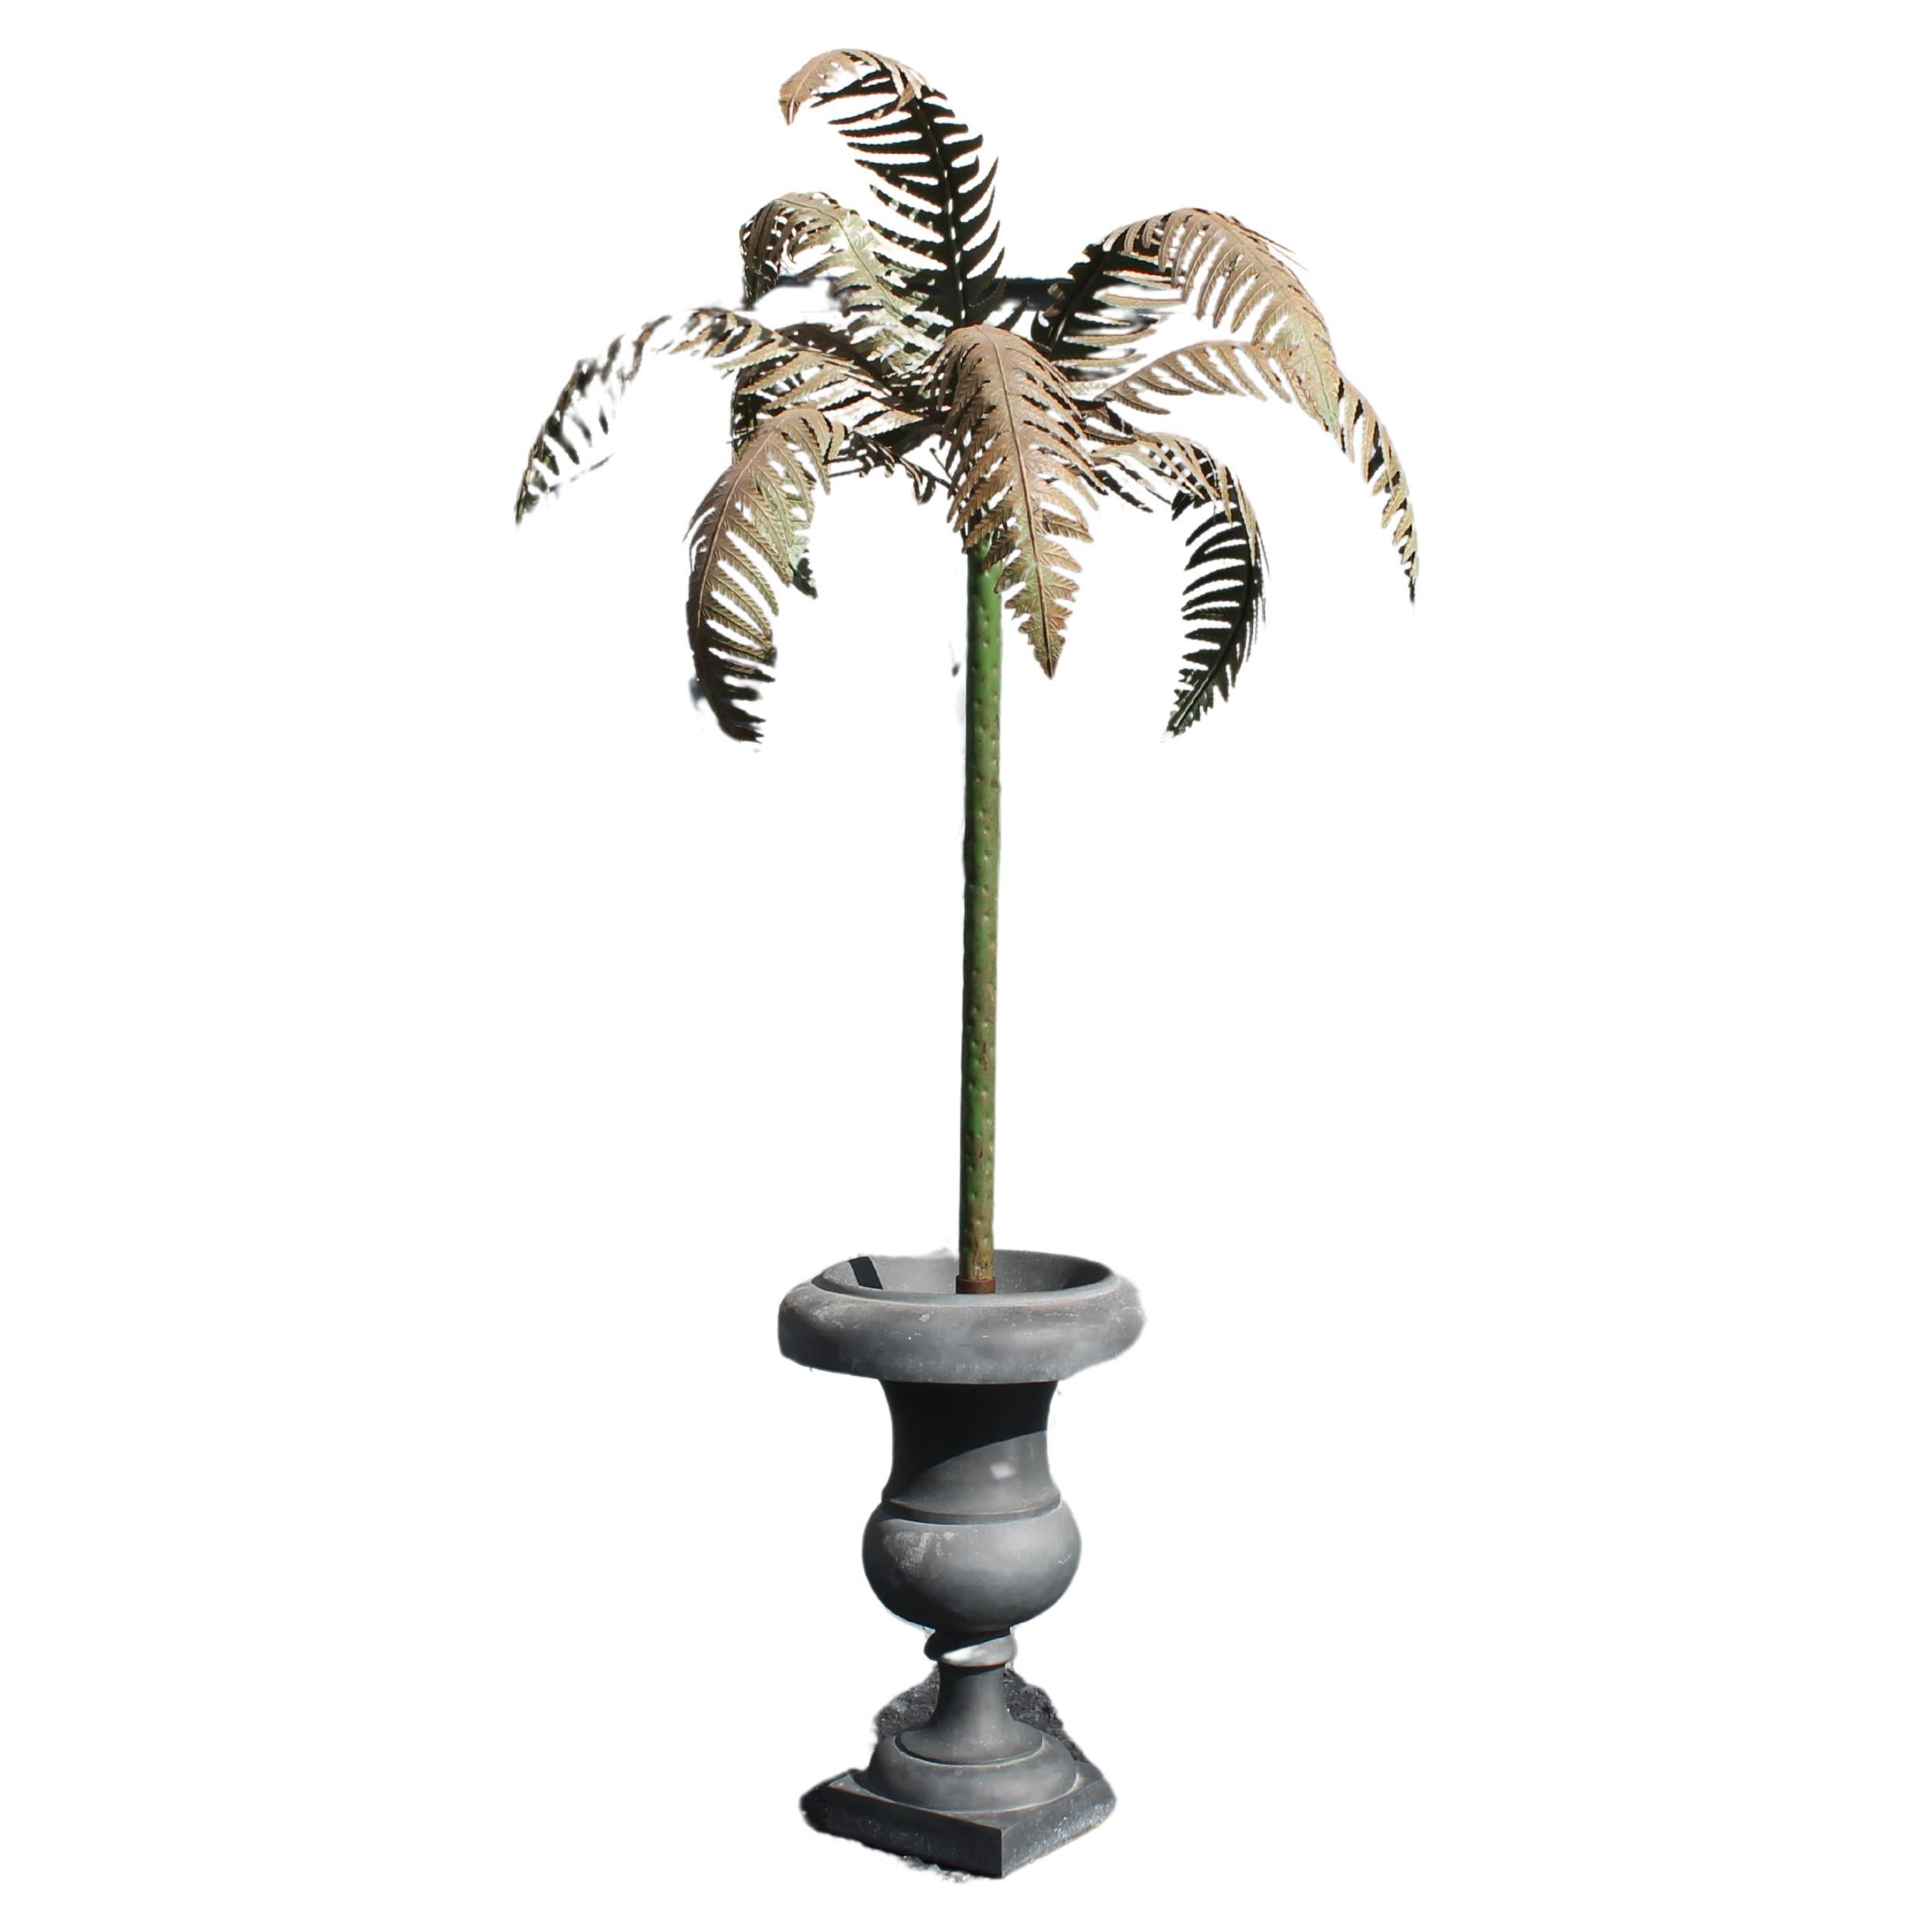 1930's French Art Deco Verde Potted Palm Tree Sculpture - Large For Sale